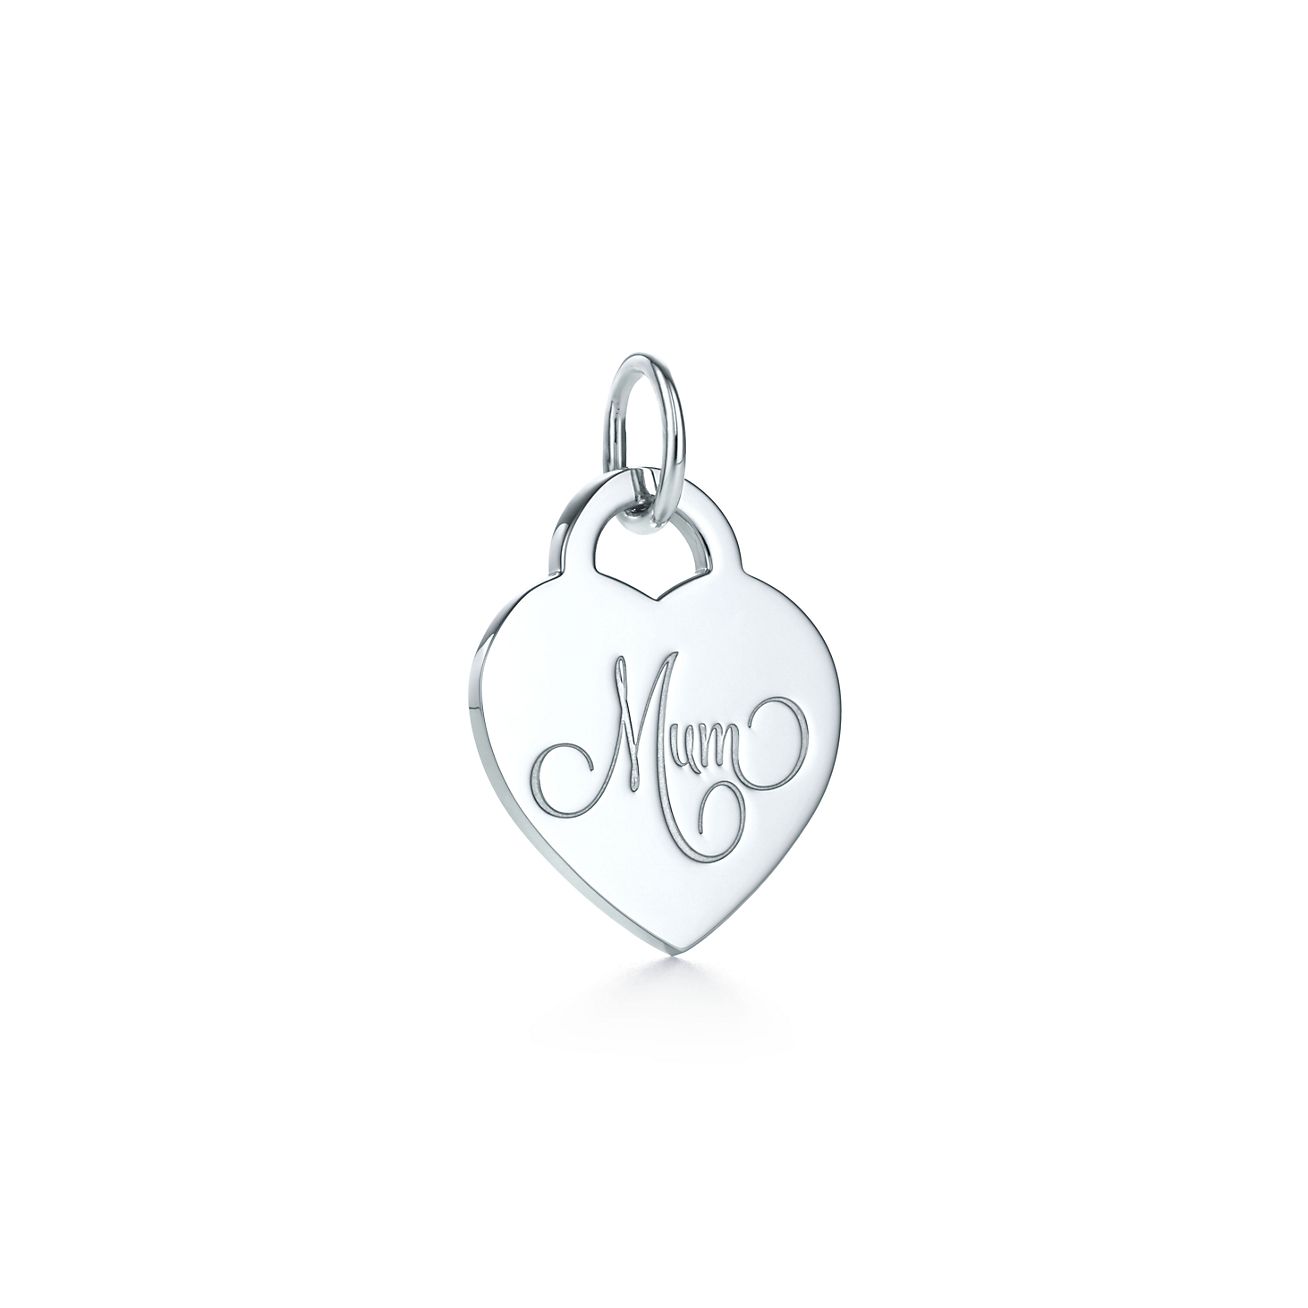 Mum heart tag charm in sterling silver 